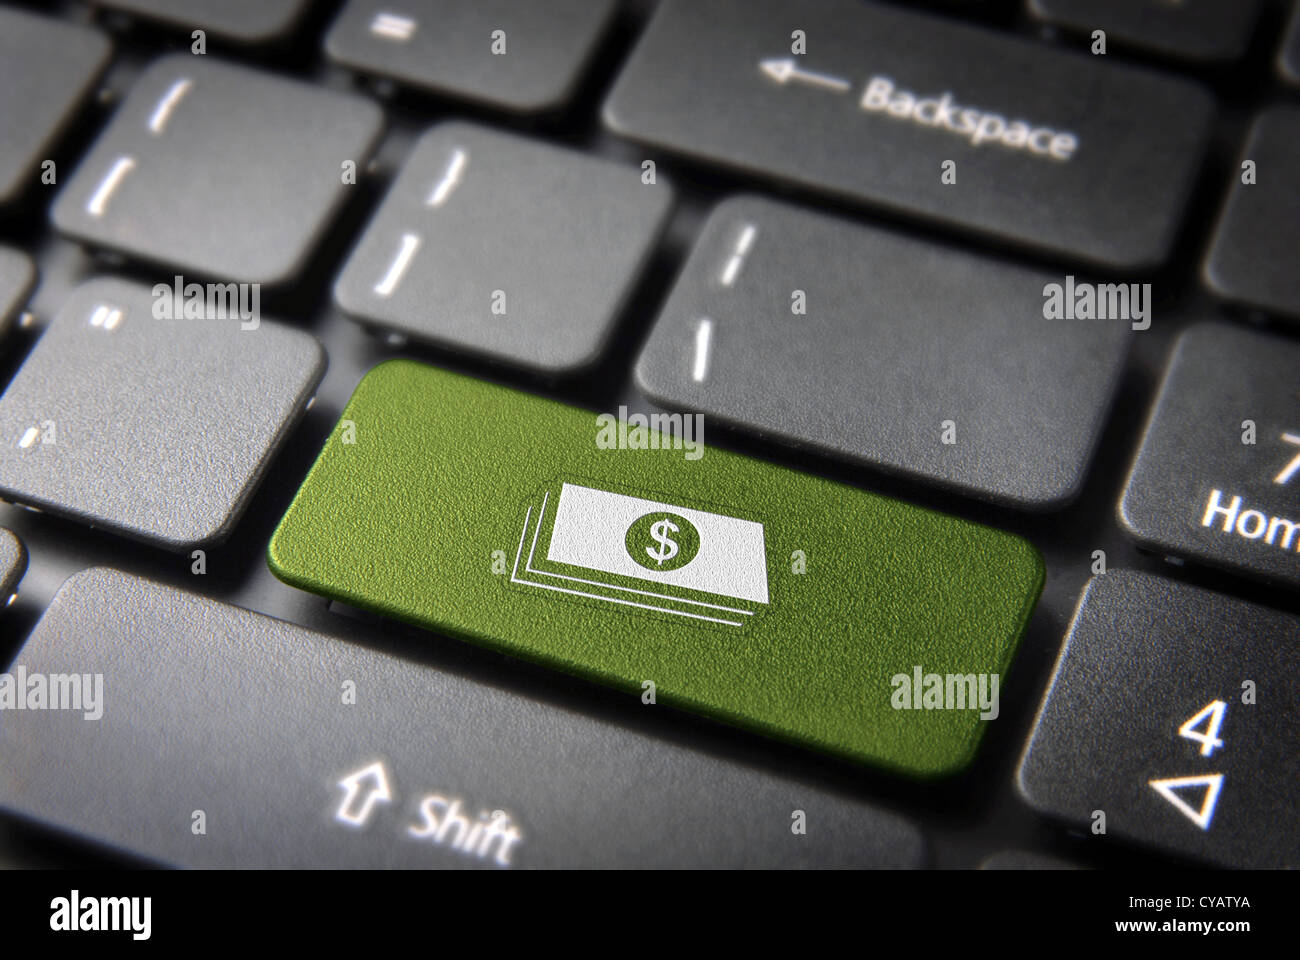 Make money with internet: green key with dollar bills icon on laptop keyboard. Included clipping path, so you can easily edit it. Stock Photo